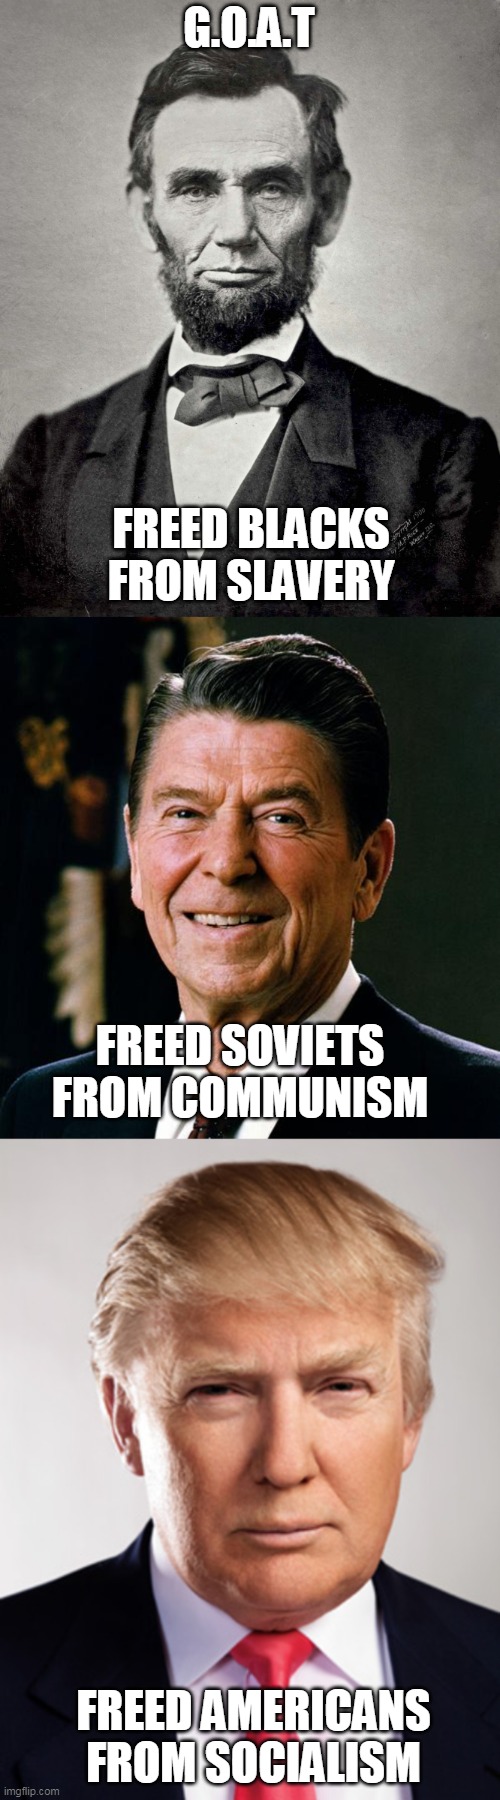 G.O.A.T; FREED BLACKS FROM SLAVERY; FREED SOVIETS FROM COMMUNISM; FREED AMERICANS FROM SOCIALISM | image tagged in ronald reagan face,donald trump,abraham lincoln | made w/ Imgflip meme maker